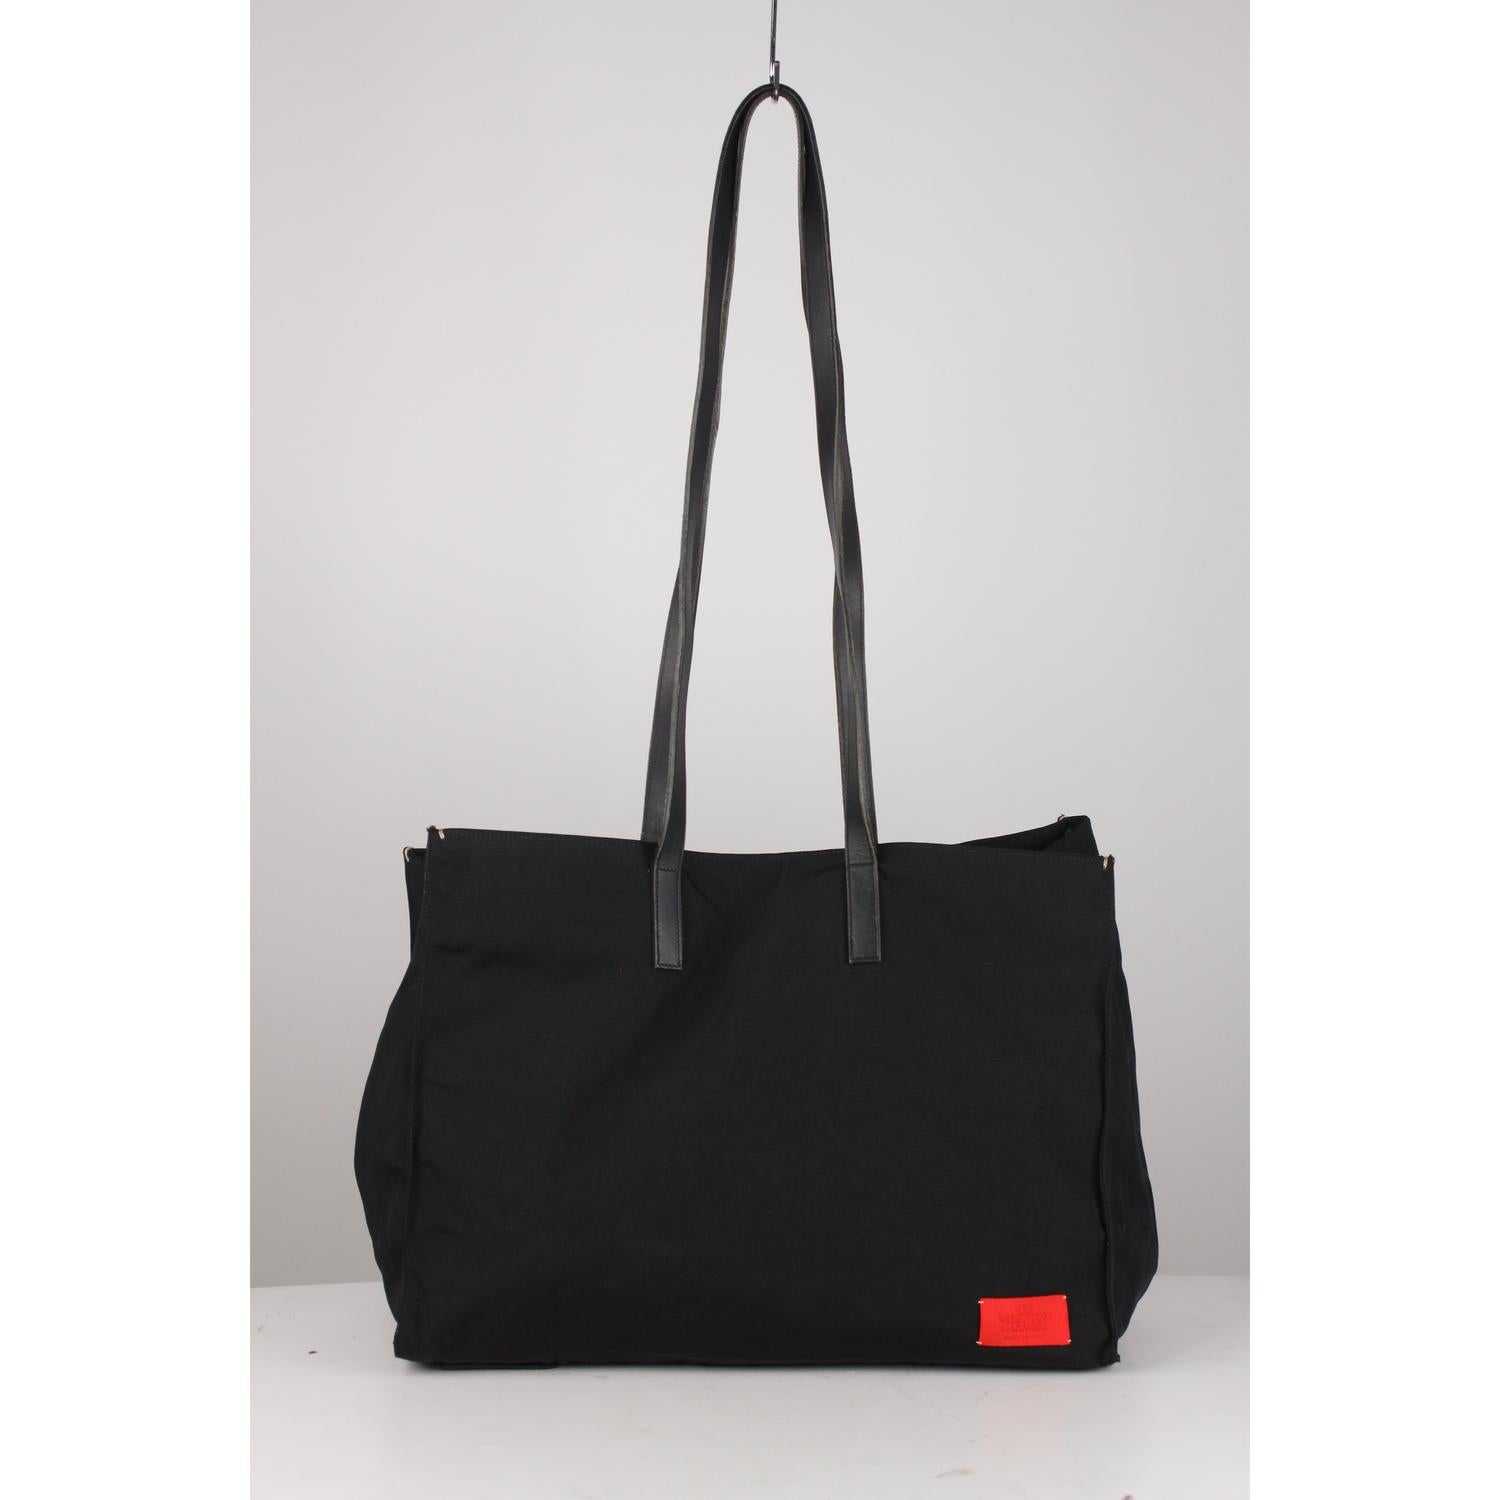 Large Valentino Garavani black canvas tote with long leather shoulder straps. Magnetic button closure on top. Fabric lining. 1 side zip pocket inside. 'Valentino Garavani - Made in Italy' red tag on the front and inside.